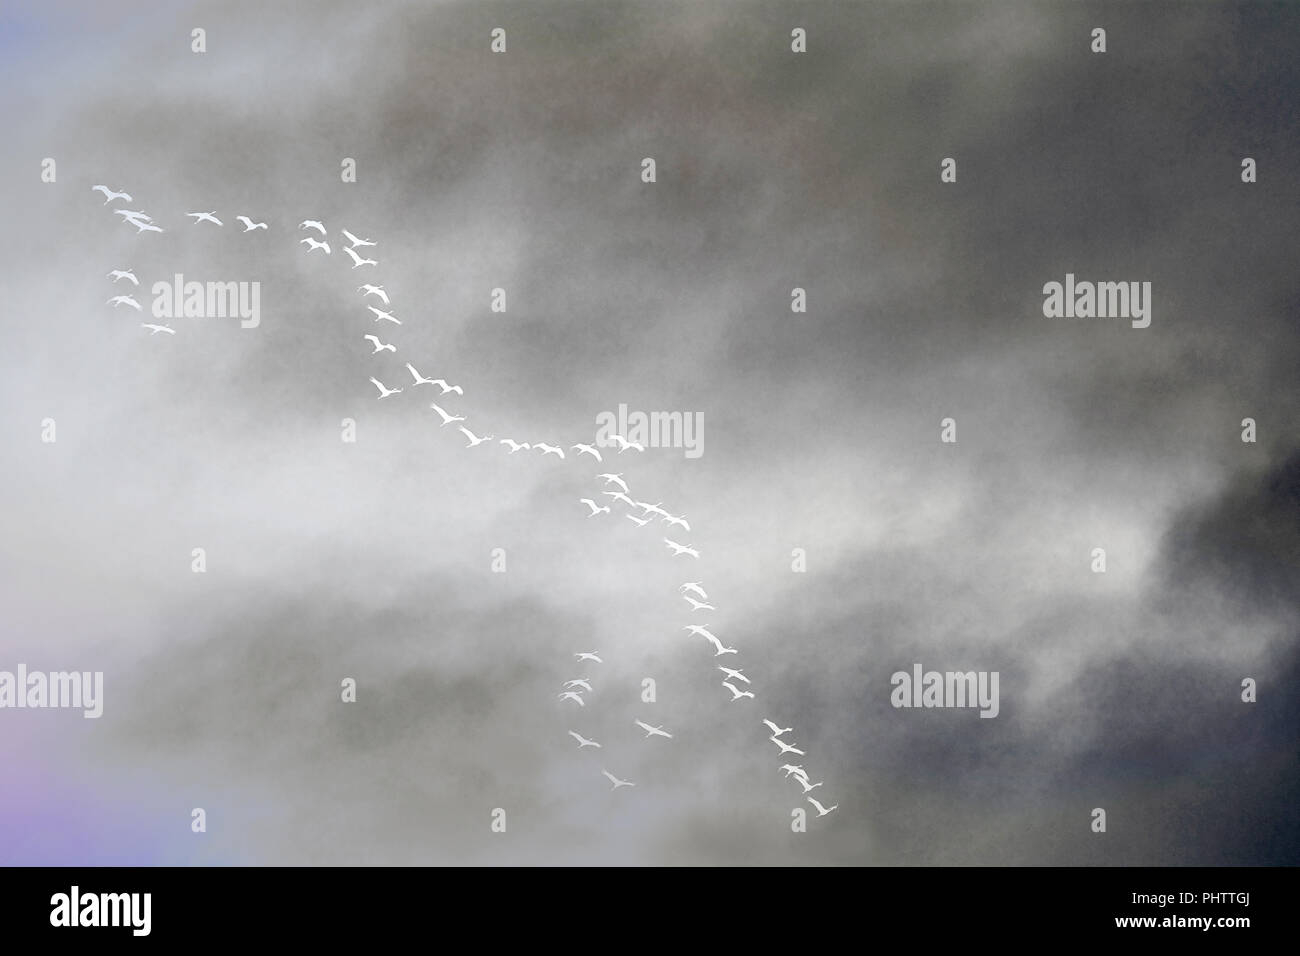 common cranes in flight formation, mourning concept, texture Stock Photo